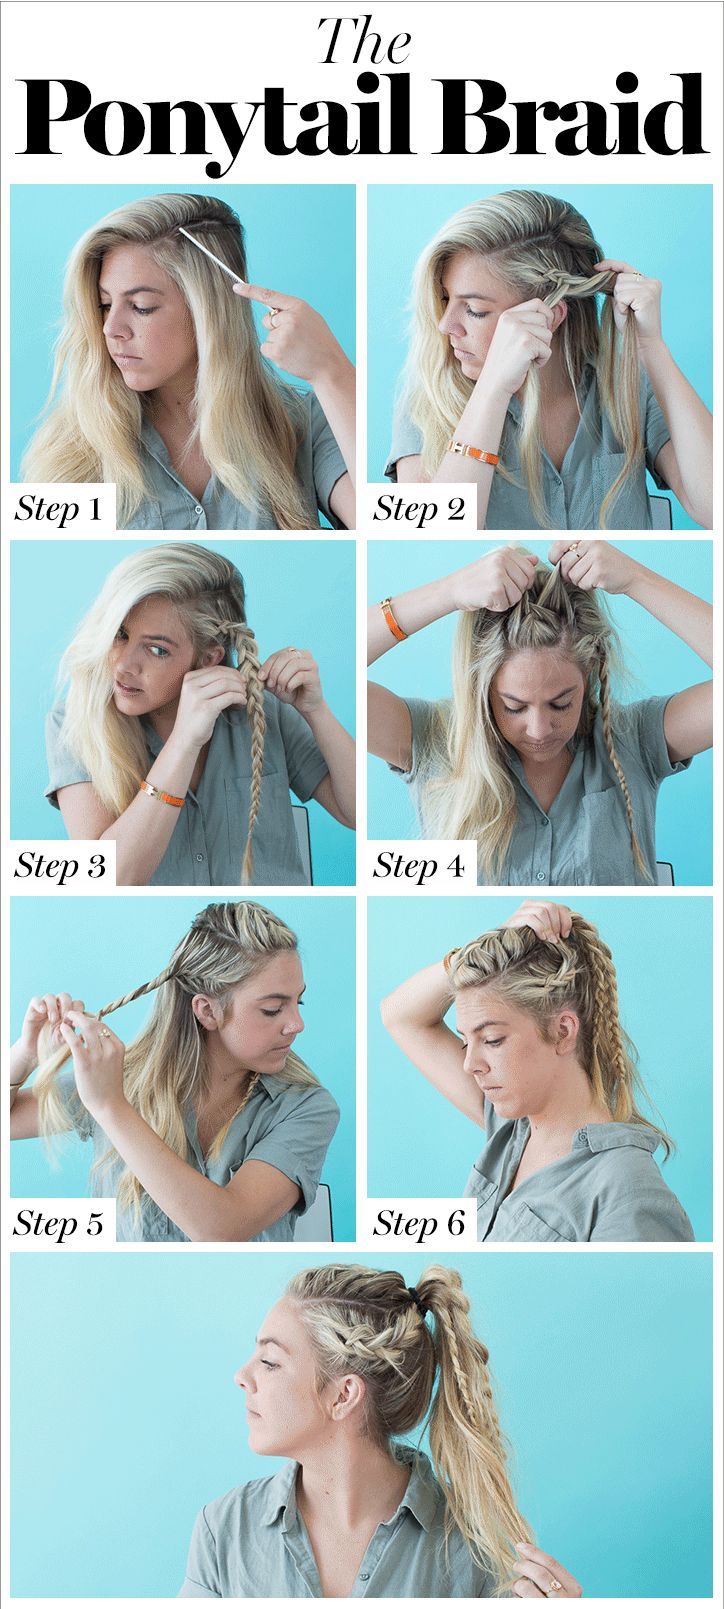 10-Cool-Braids-You-Can-Actually-Do-on-Yourself.jpg